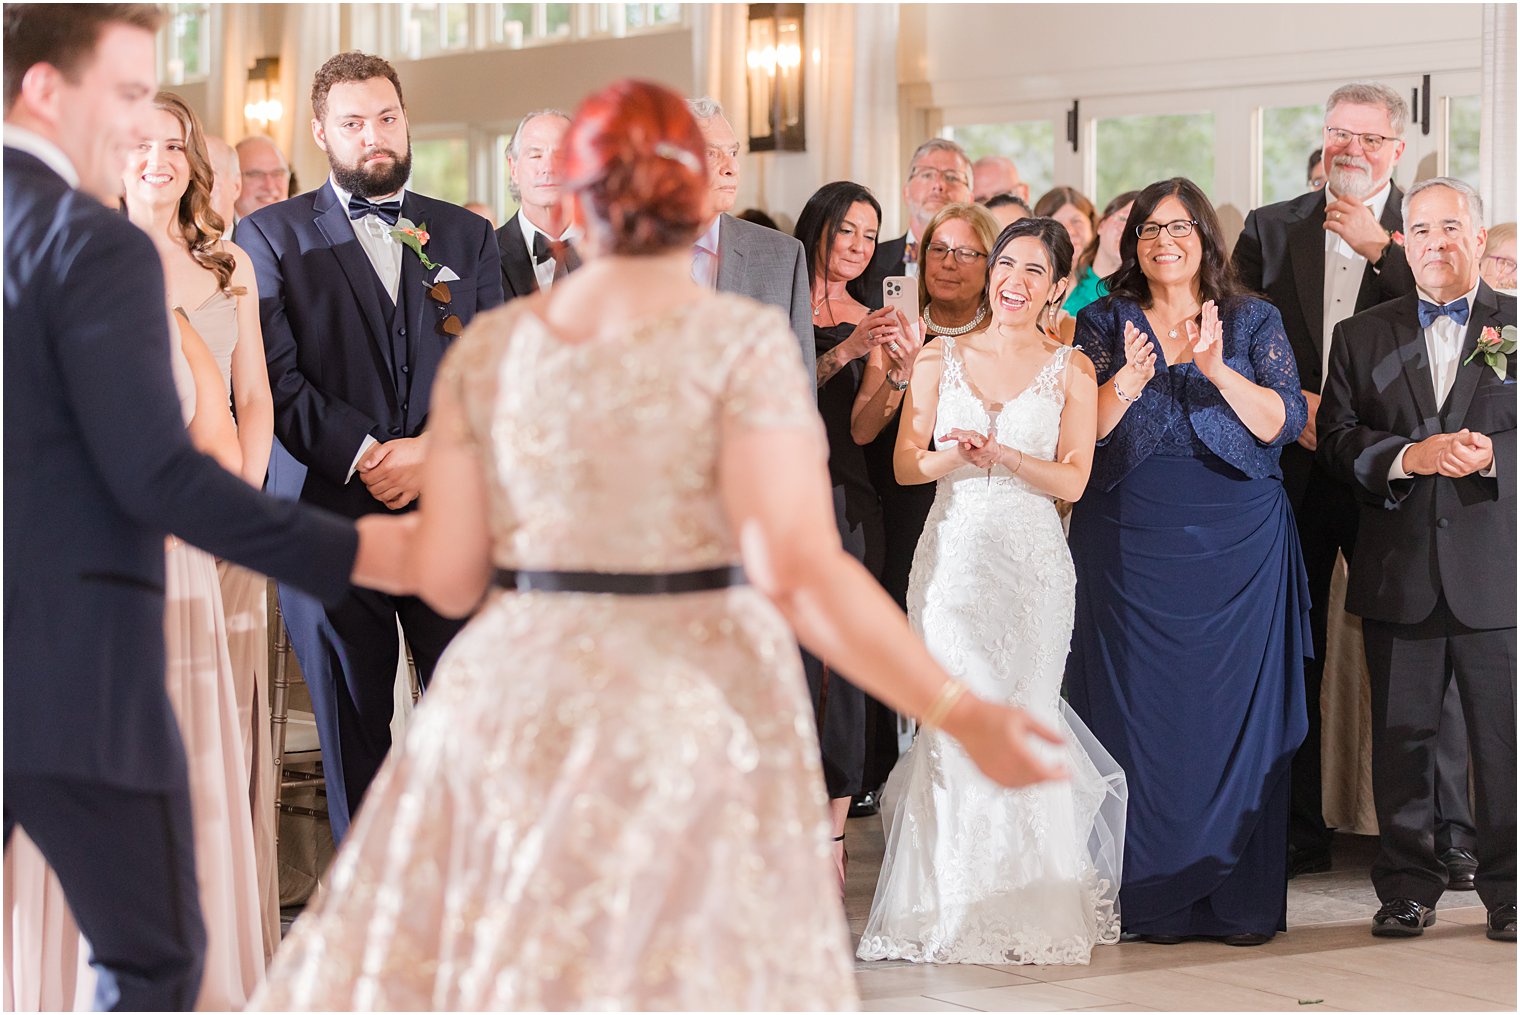 bride smiles at mother-in-law and husband on dance floor